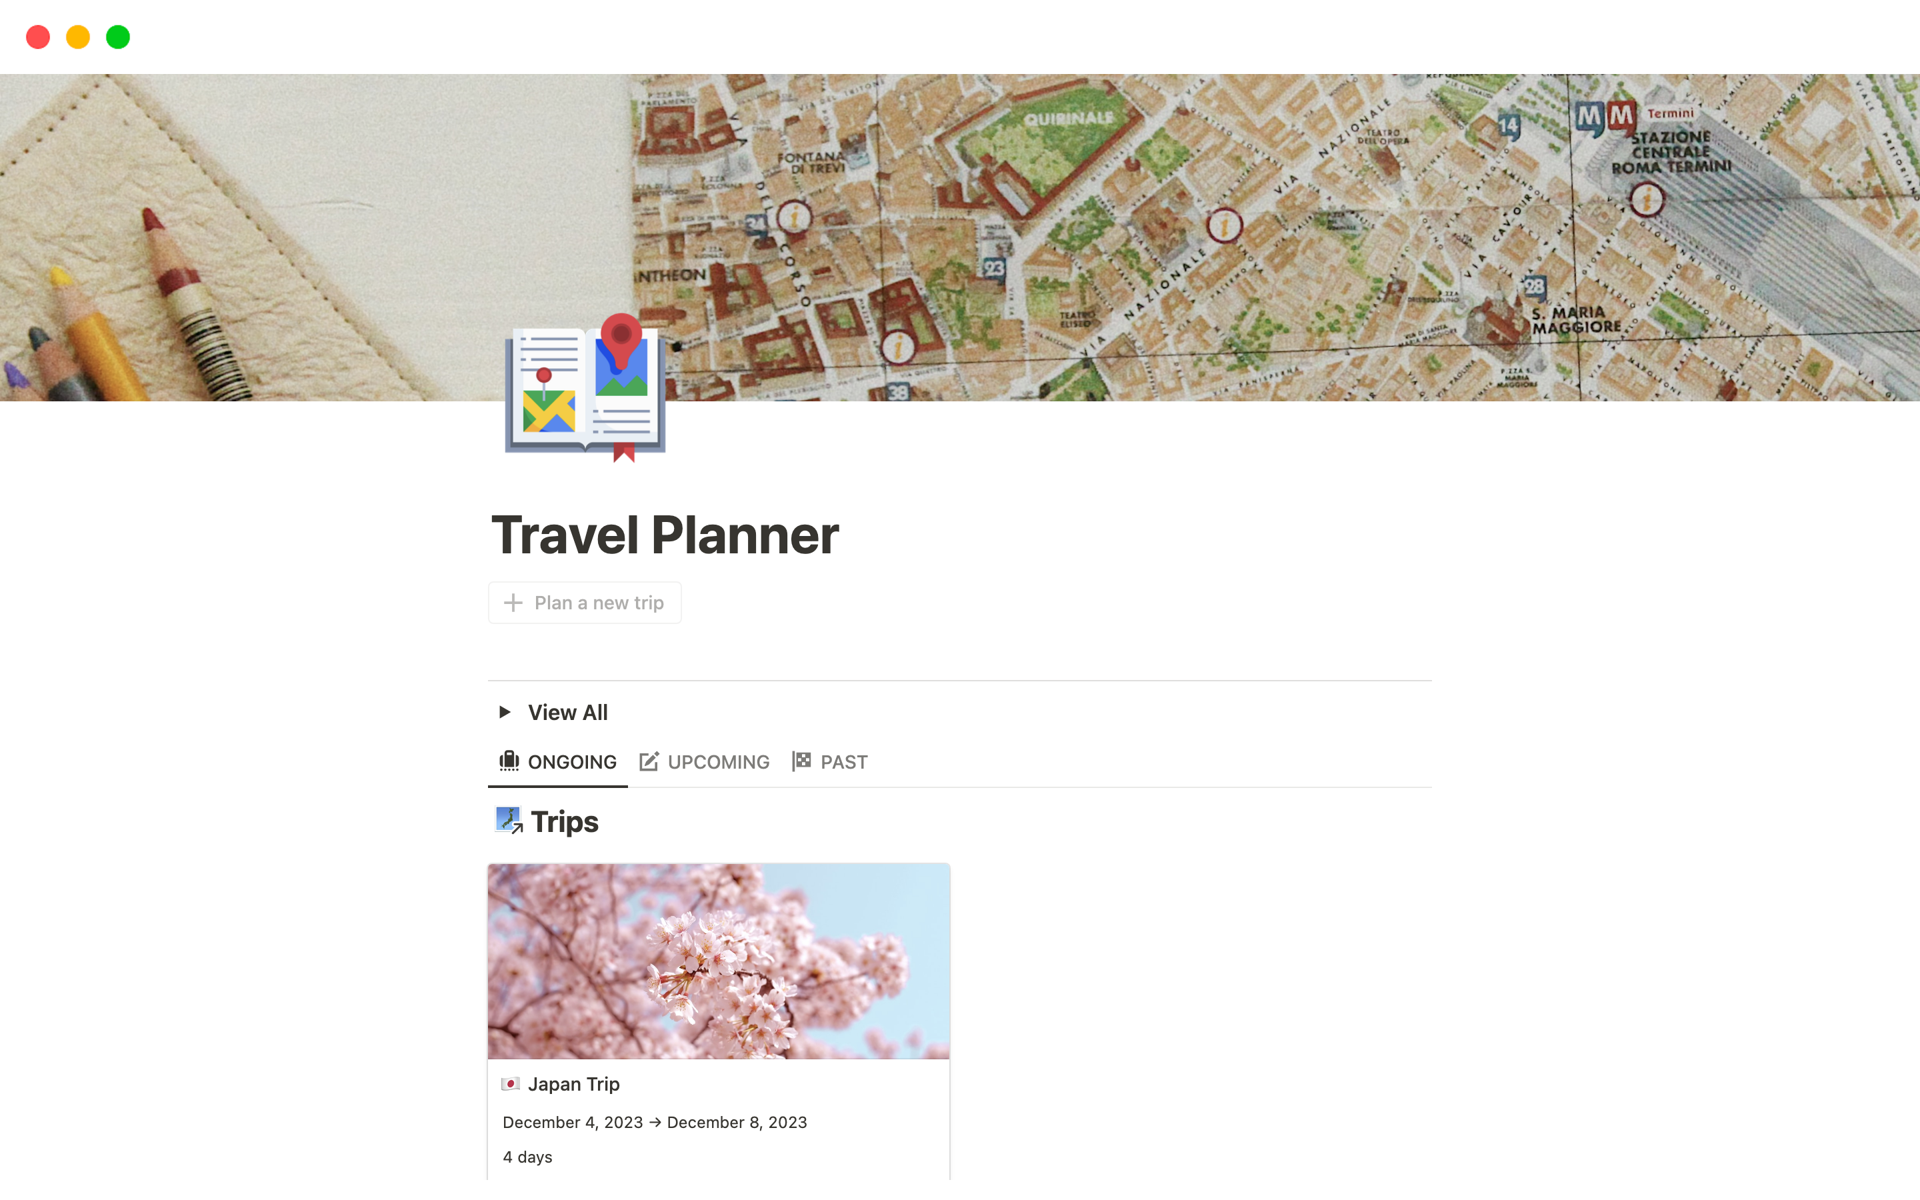 The Travel Planner Notion template simplifies trip organization, allowing you to easily monitor ongoing, upcoming, and past trips all in one place.